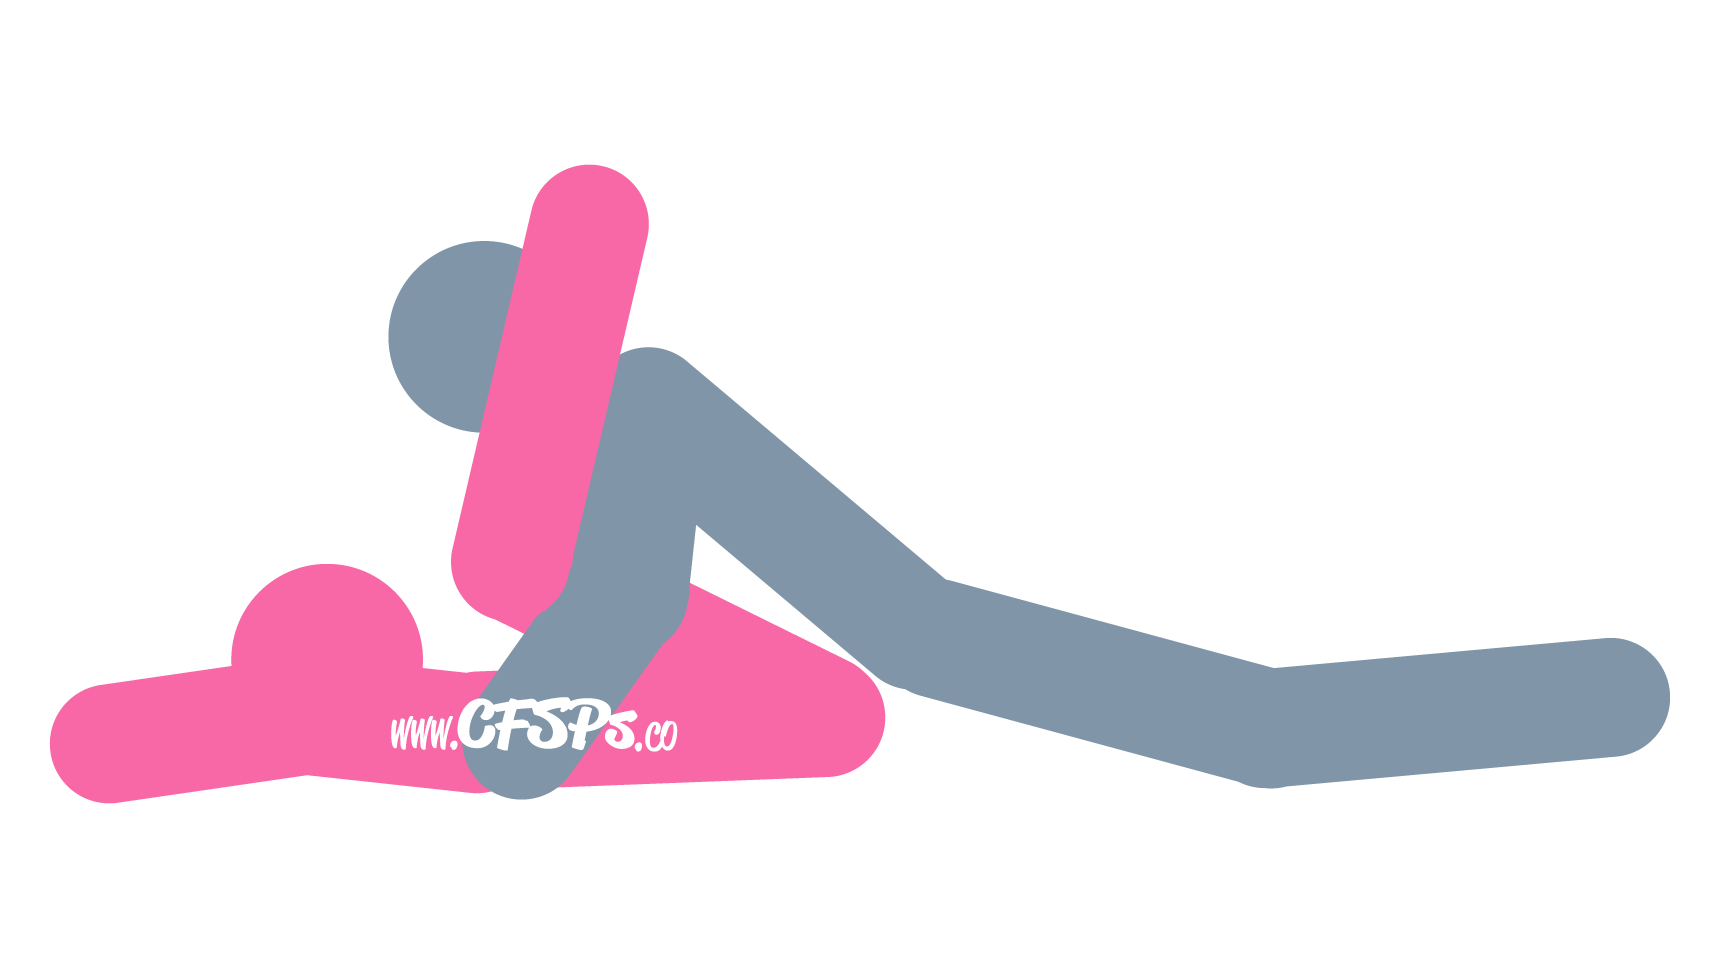 An illustration of the Squashing the Deckchair sex position. This picture demonstrates how Squashing the Deckchair is a man-on-top sex position with very deep penetration.